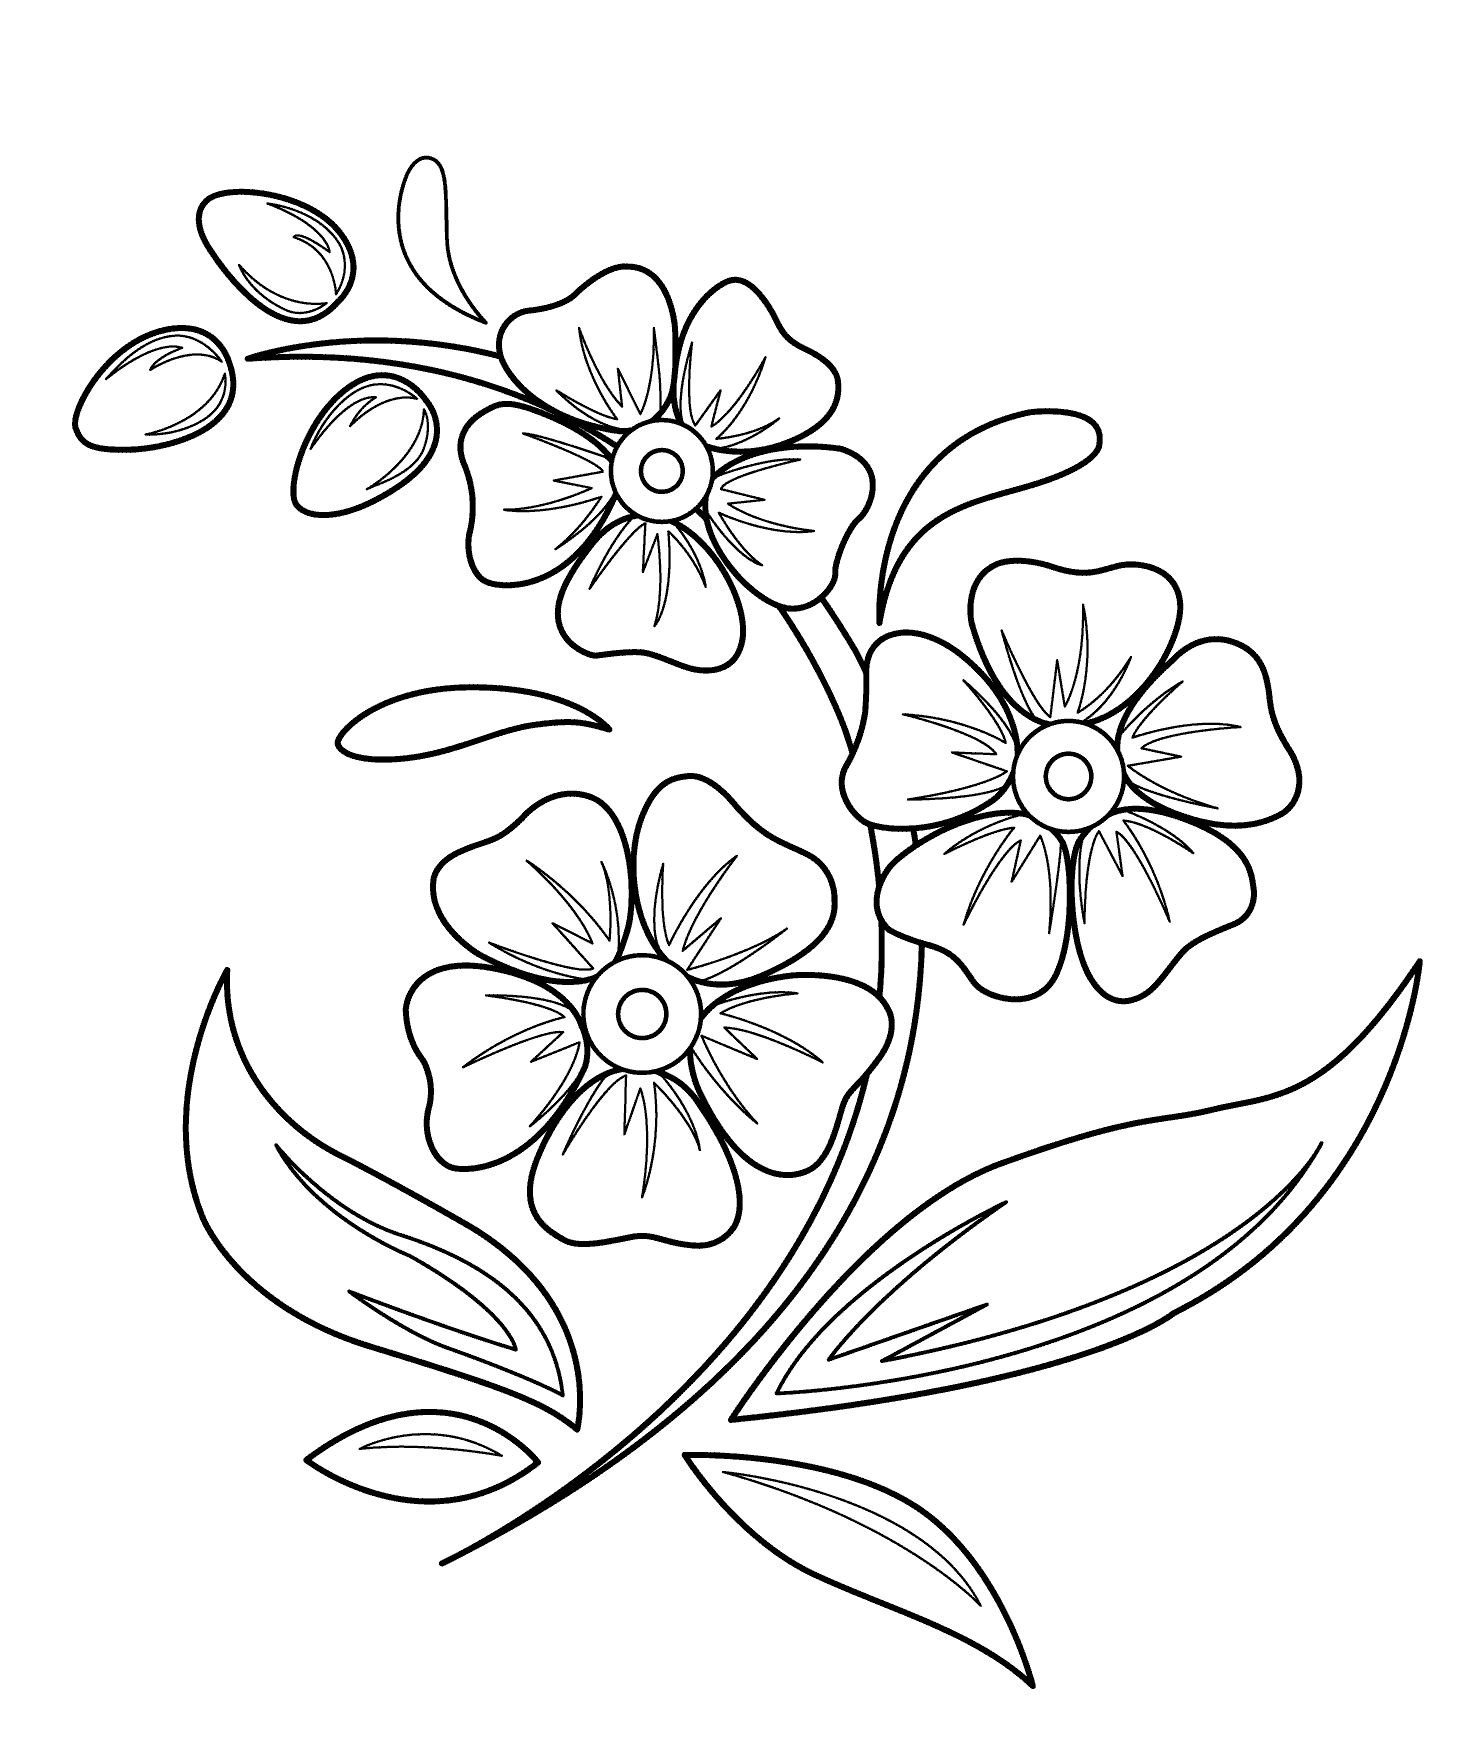 Flowers coloring pages for kids, printable free | coloing-4kids.com